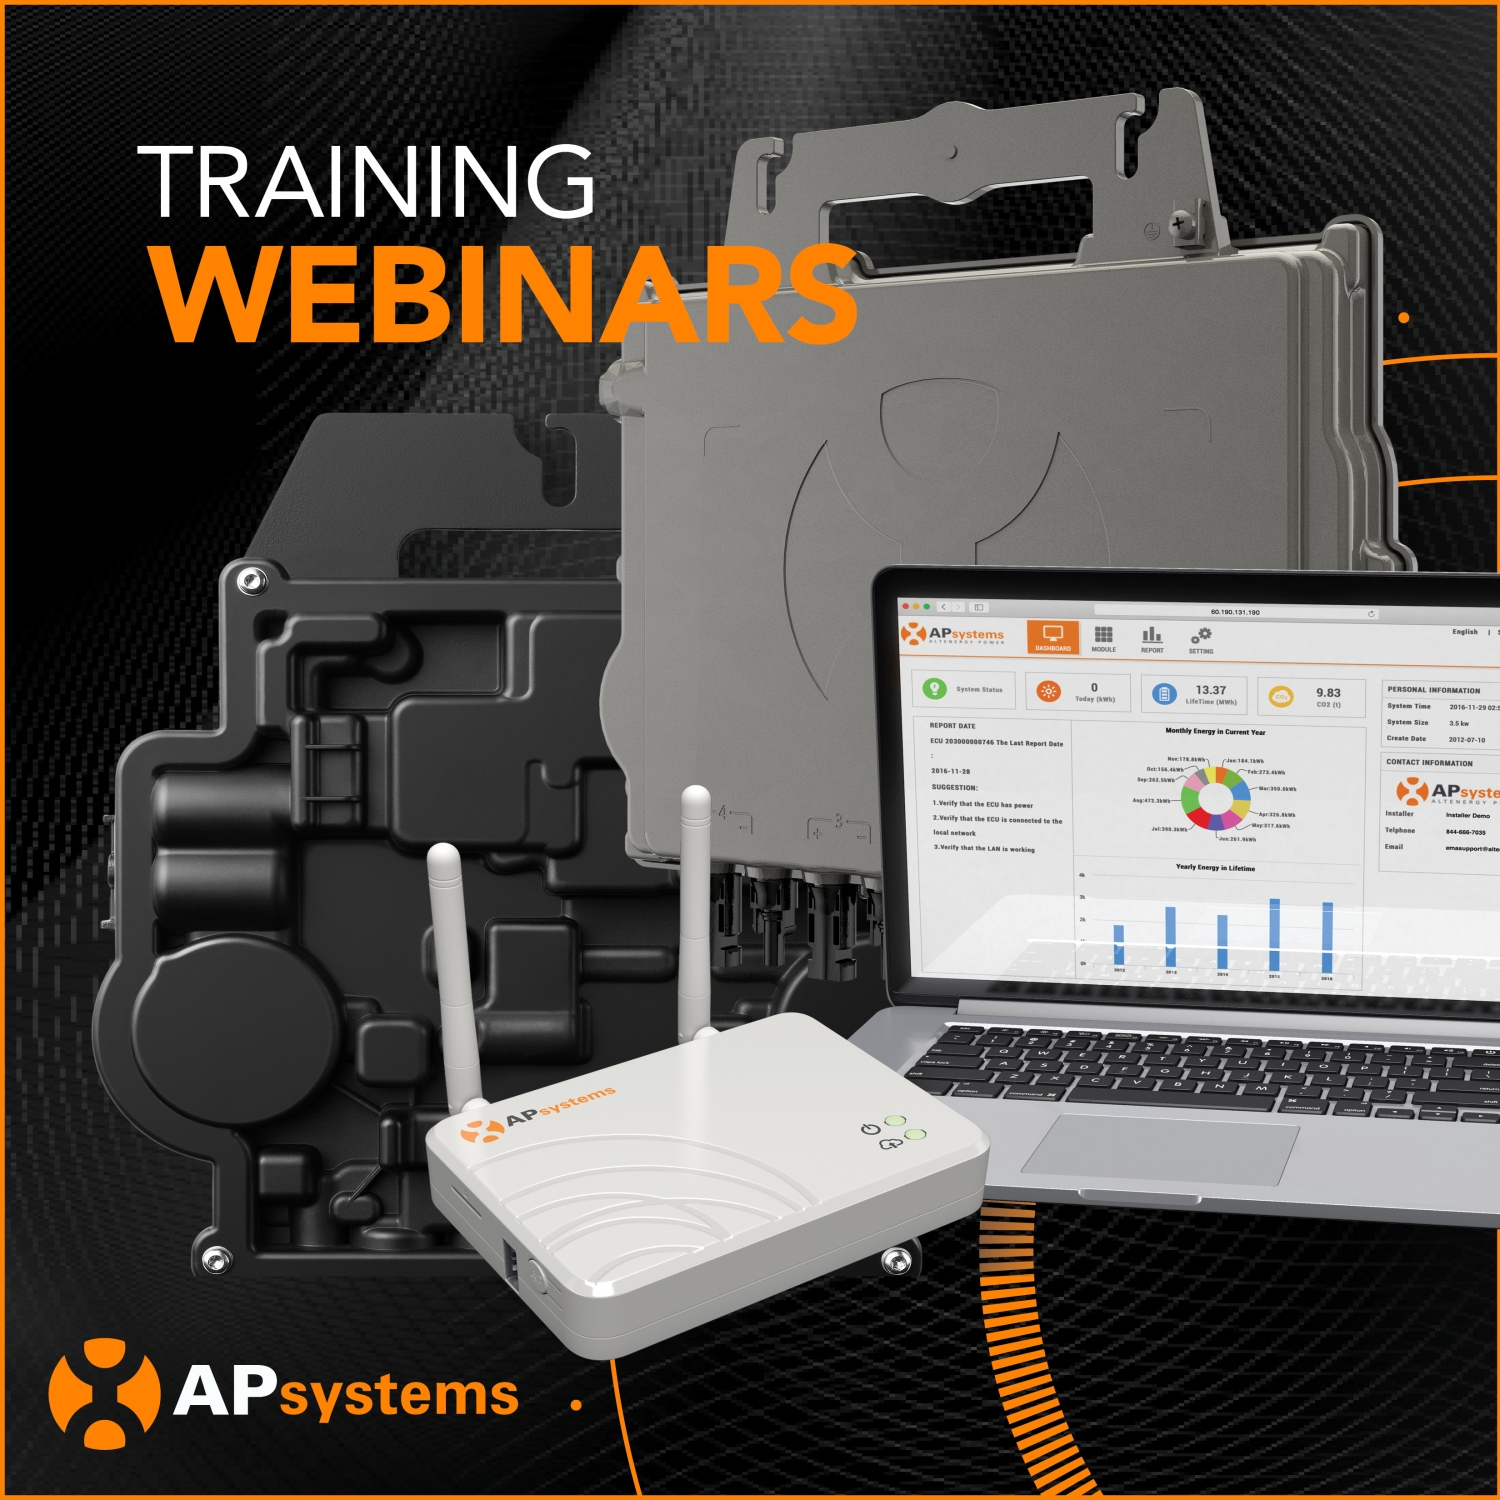 Installers - Solar USA Webinars multi-platform Training technology | for Free The leader Professional MLPE global in APsystems